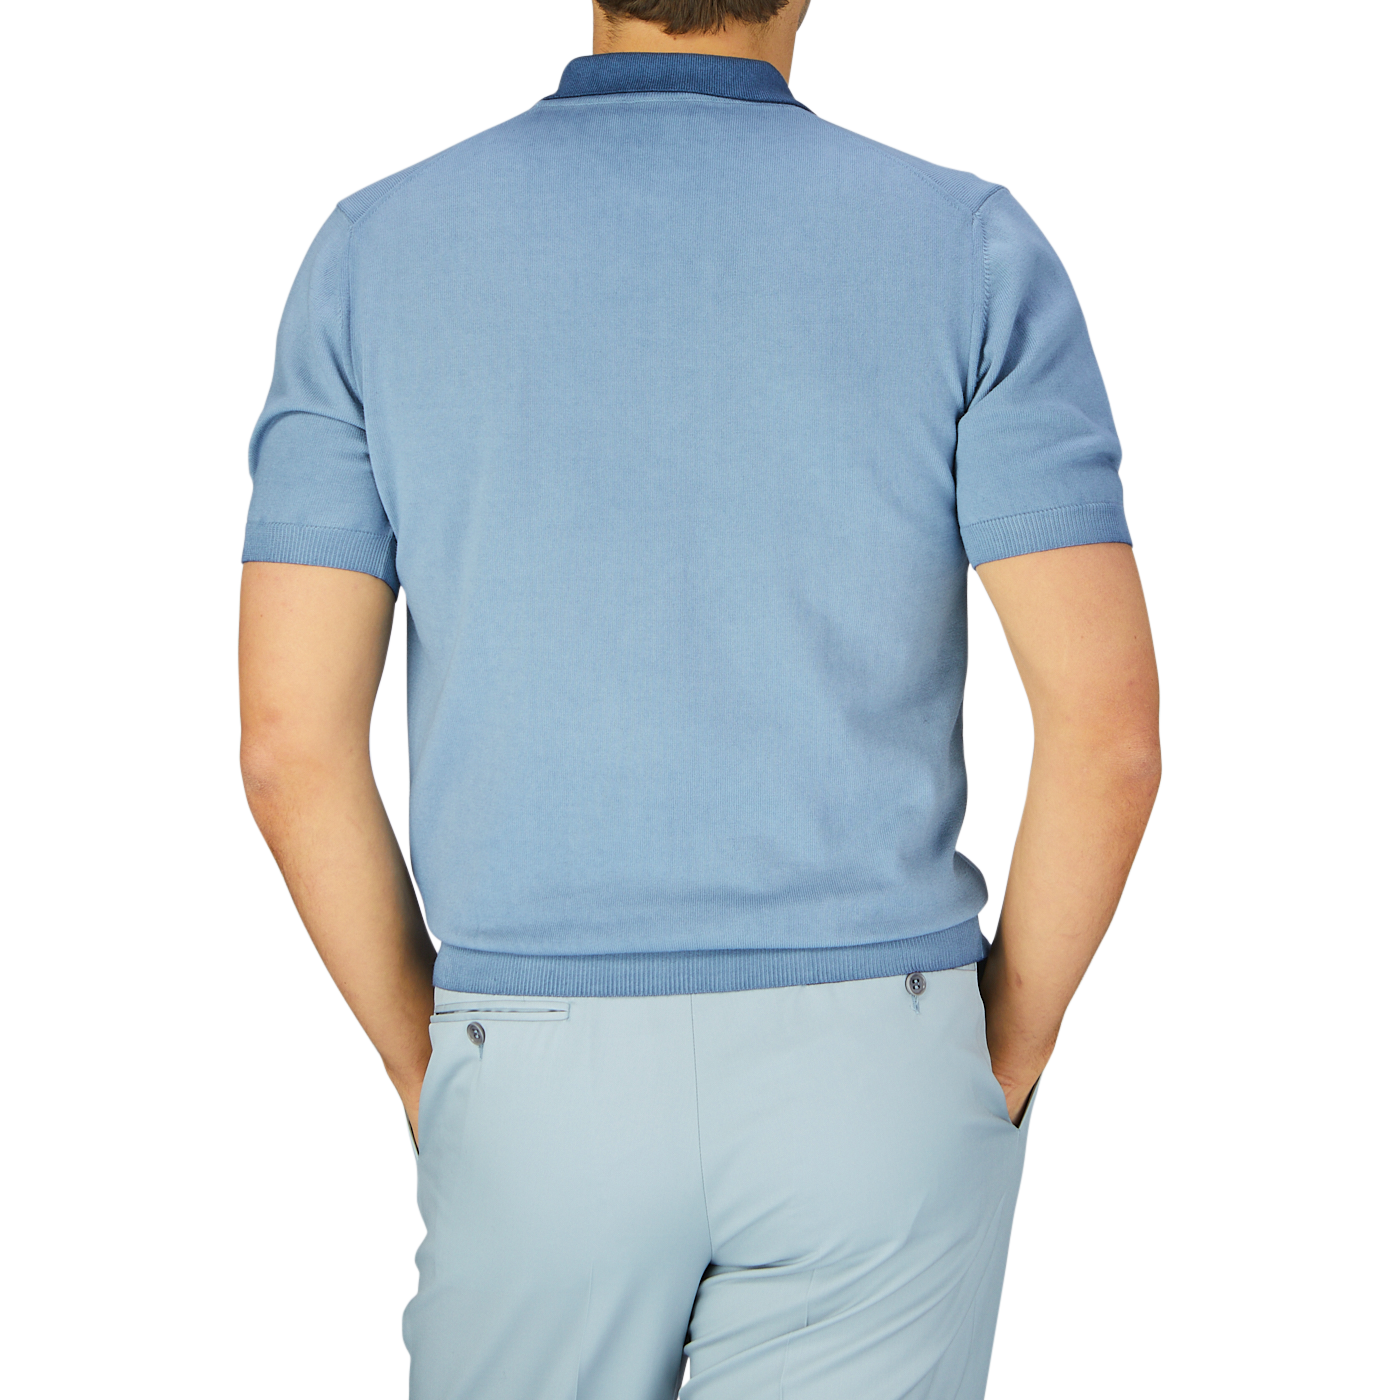 A man seen from behind, wearing a Altea Light Blue Dyed Cotton Capri Collar Polo Shirt and matching trousers against a grey background.